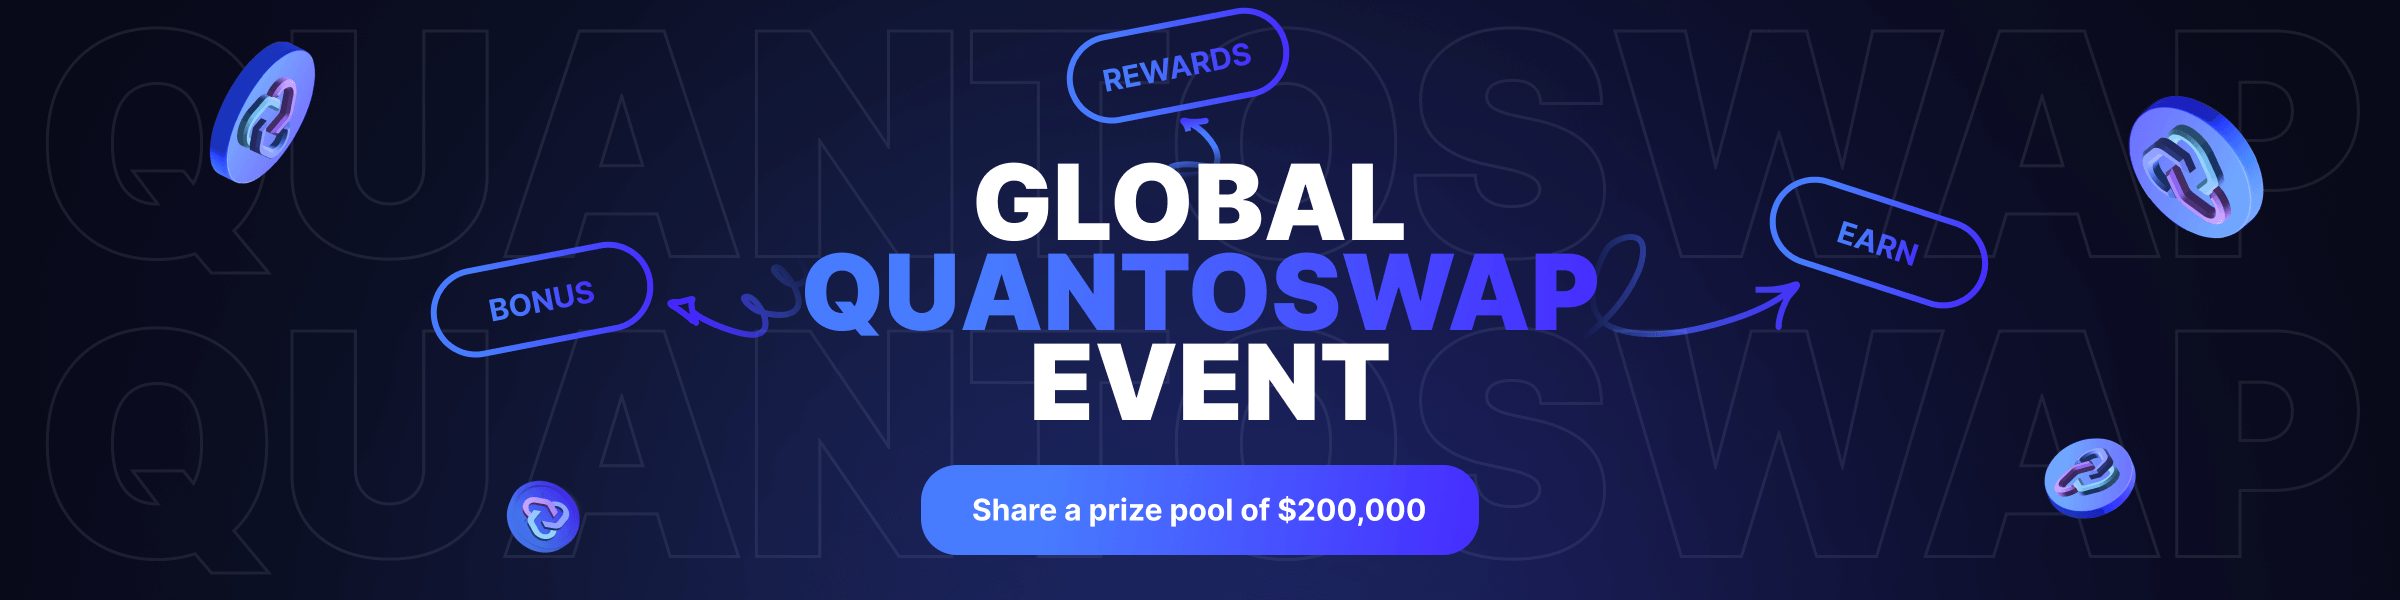 Global Quantoswap event banner